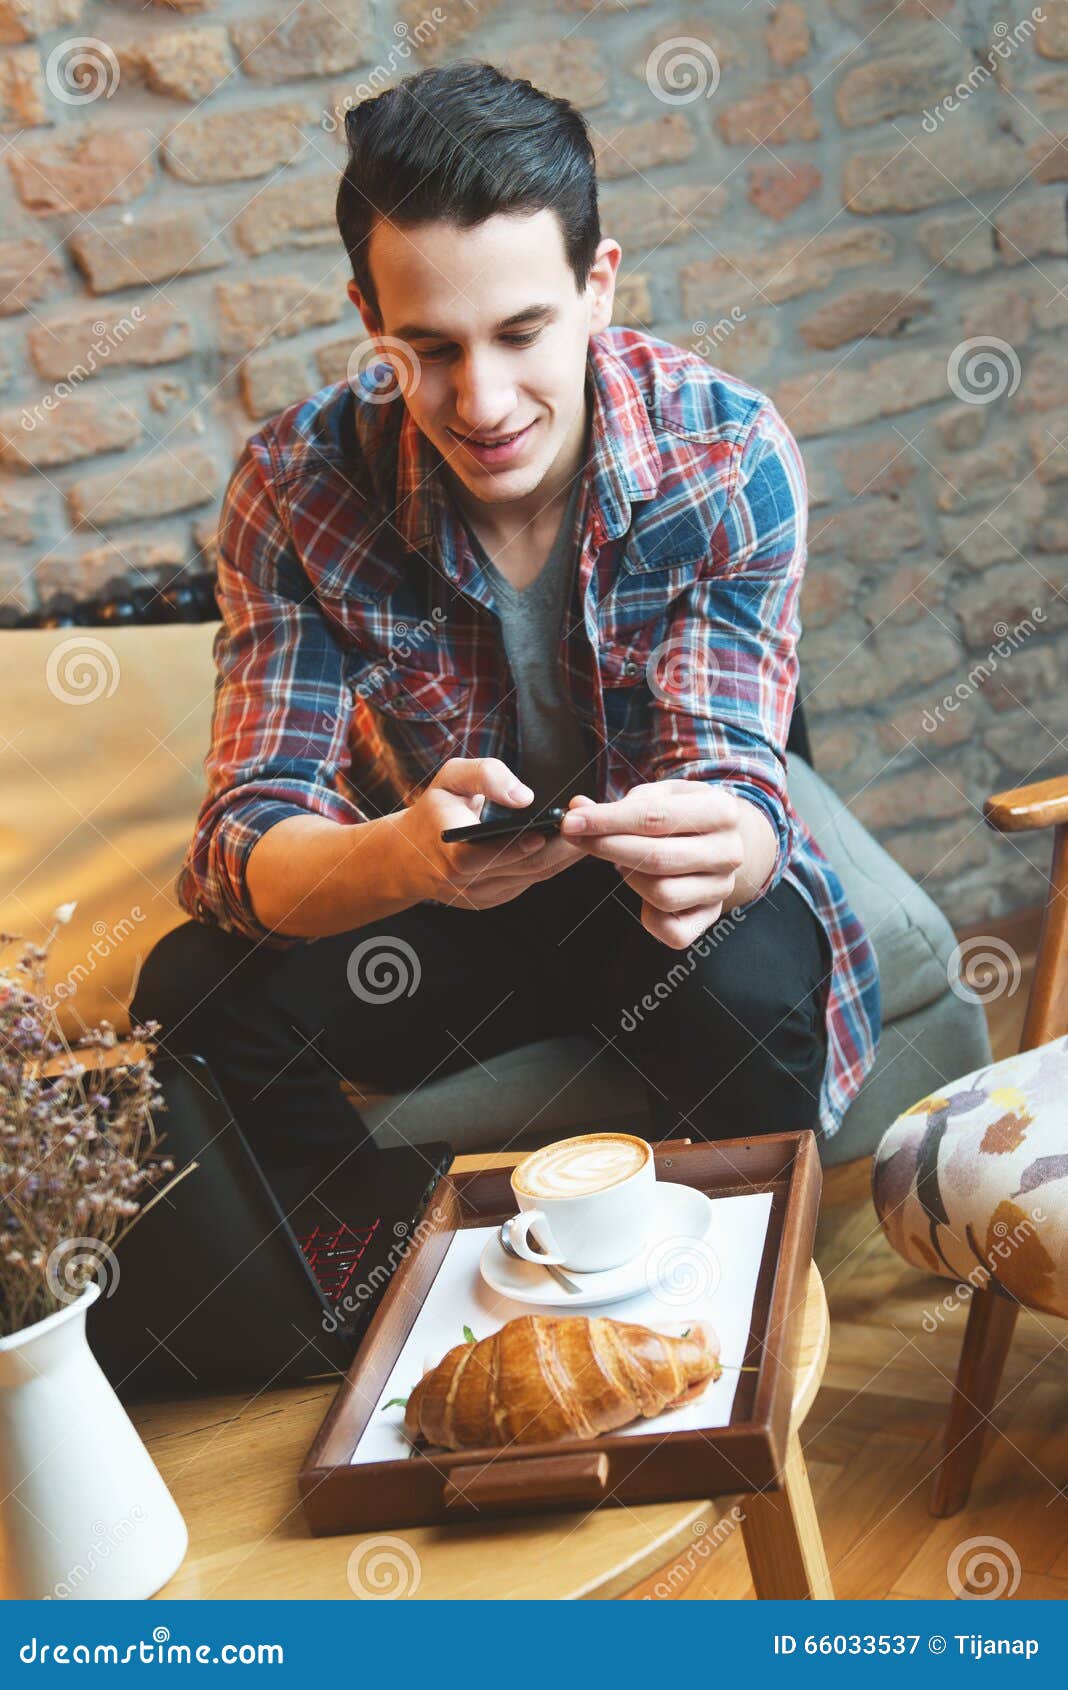 young man sitting at a cafe, taking a snapshot of his food